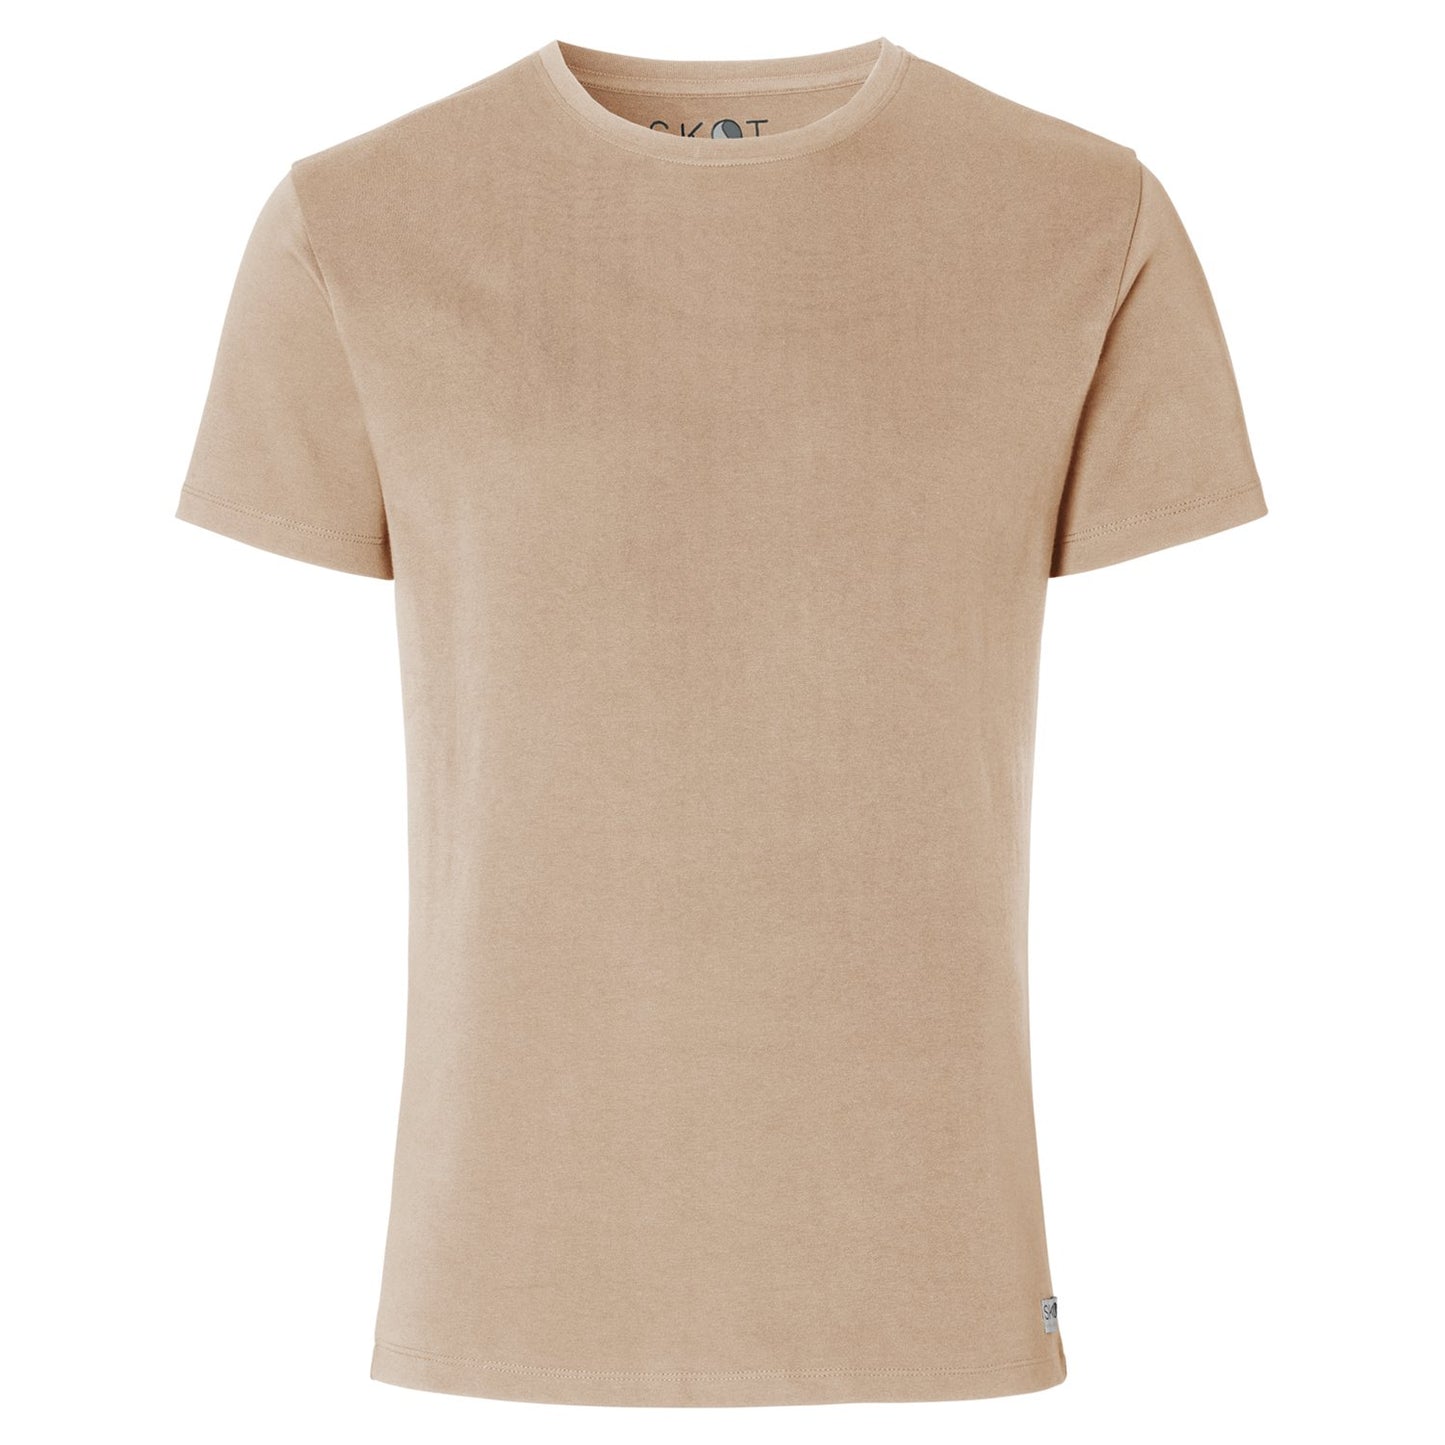 T-shirt - Earth - Round Neck - Sand